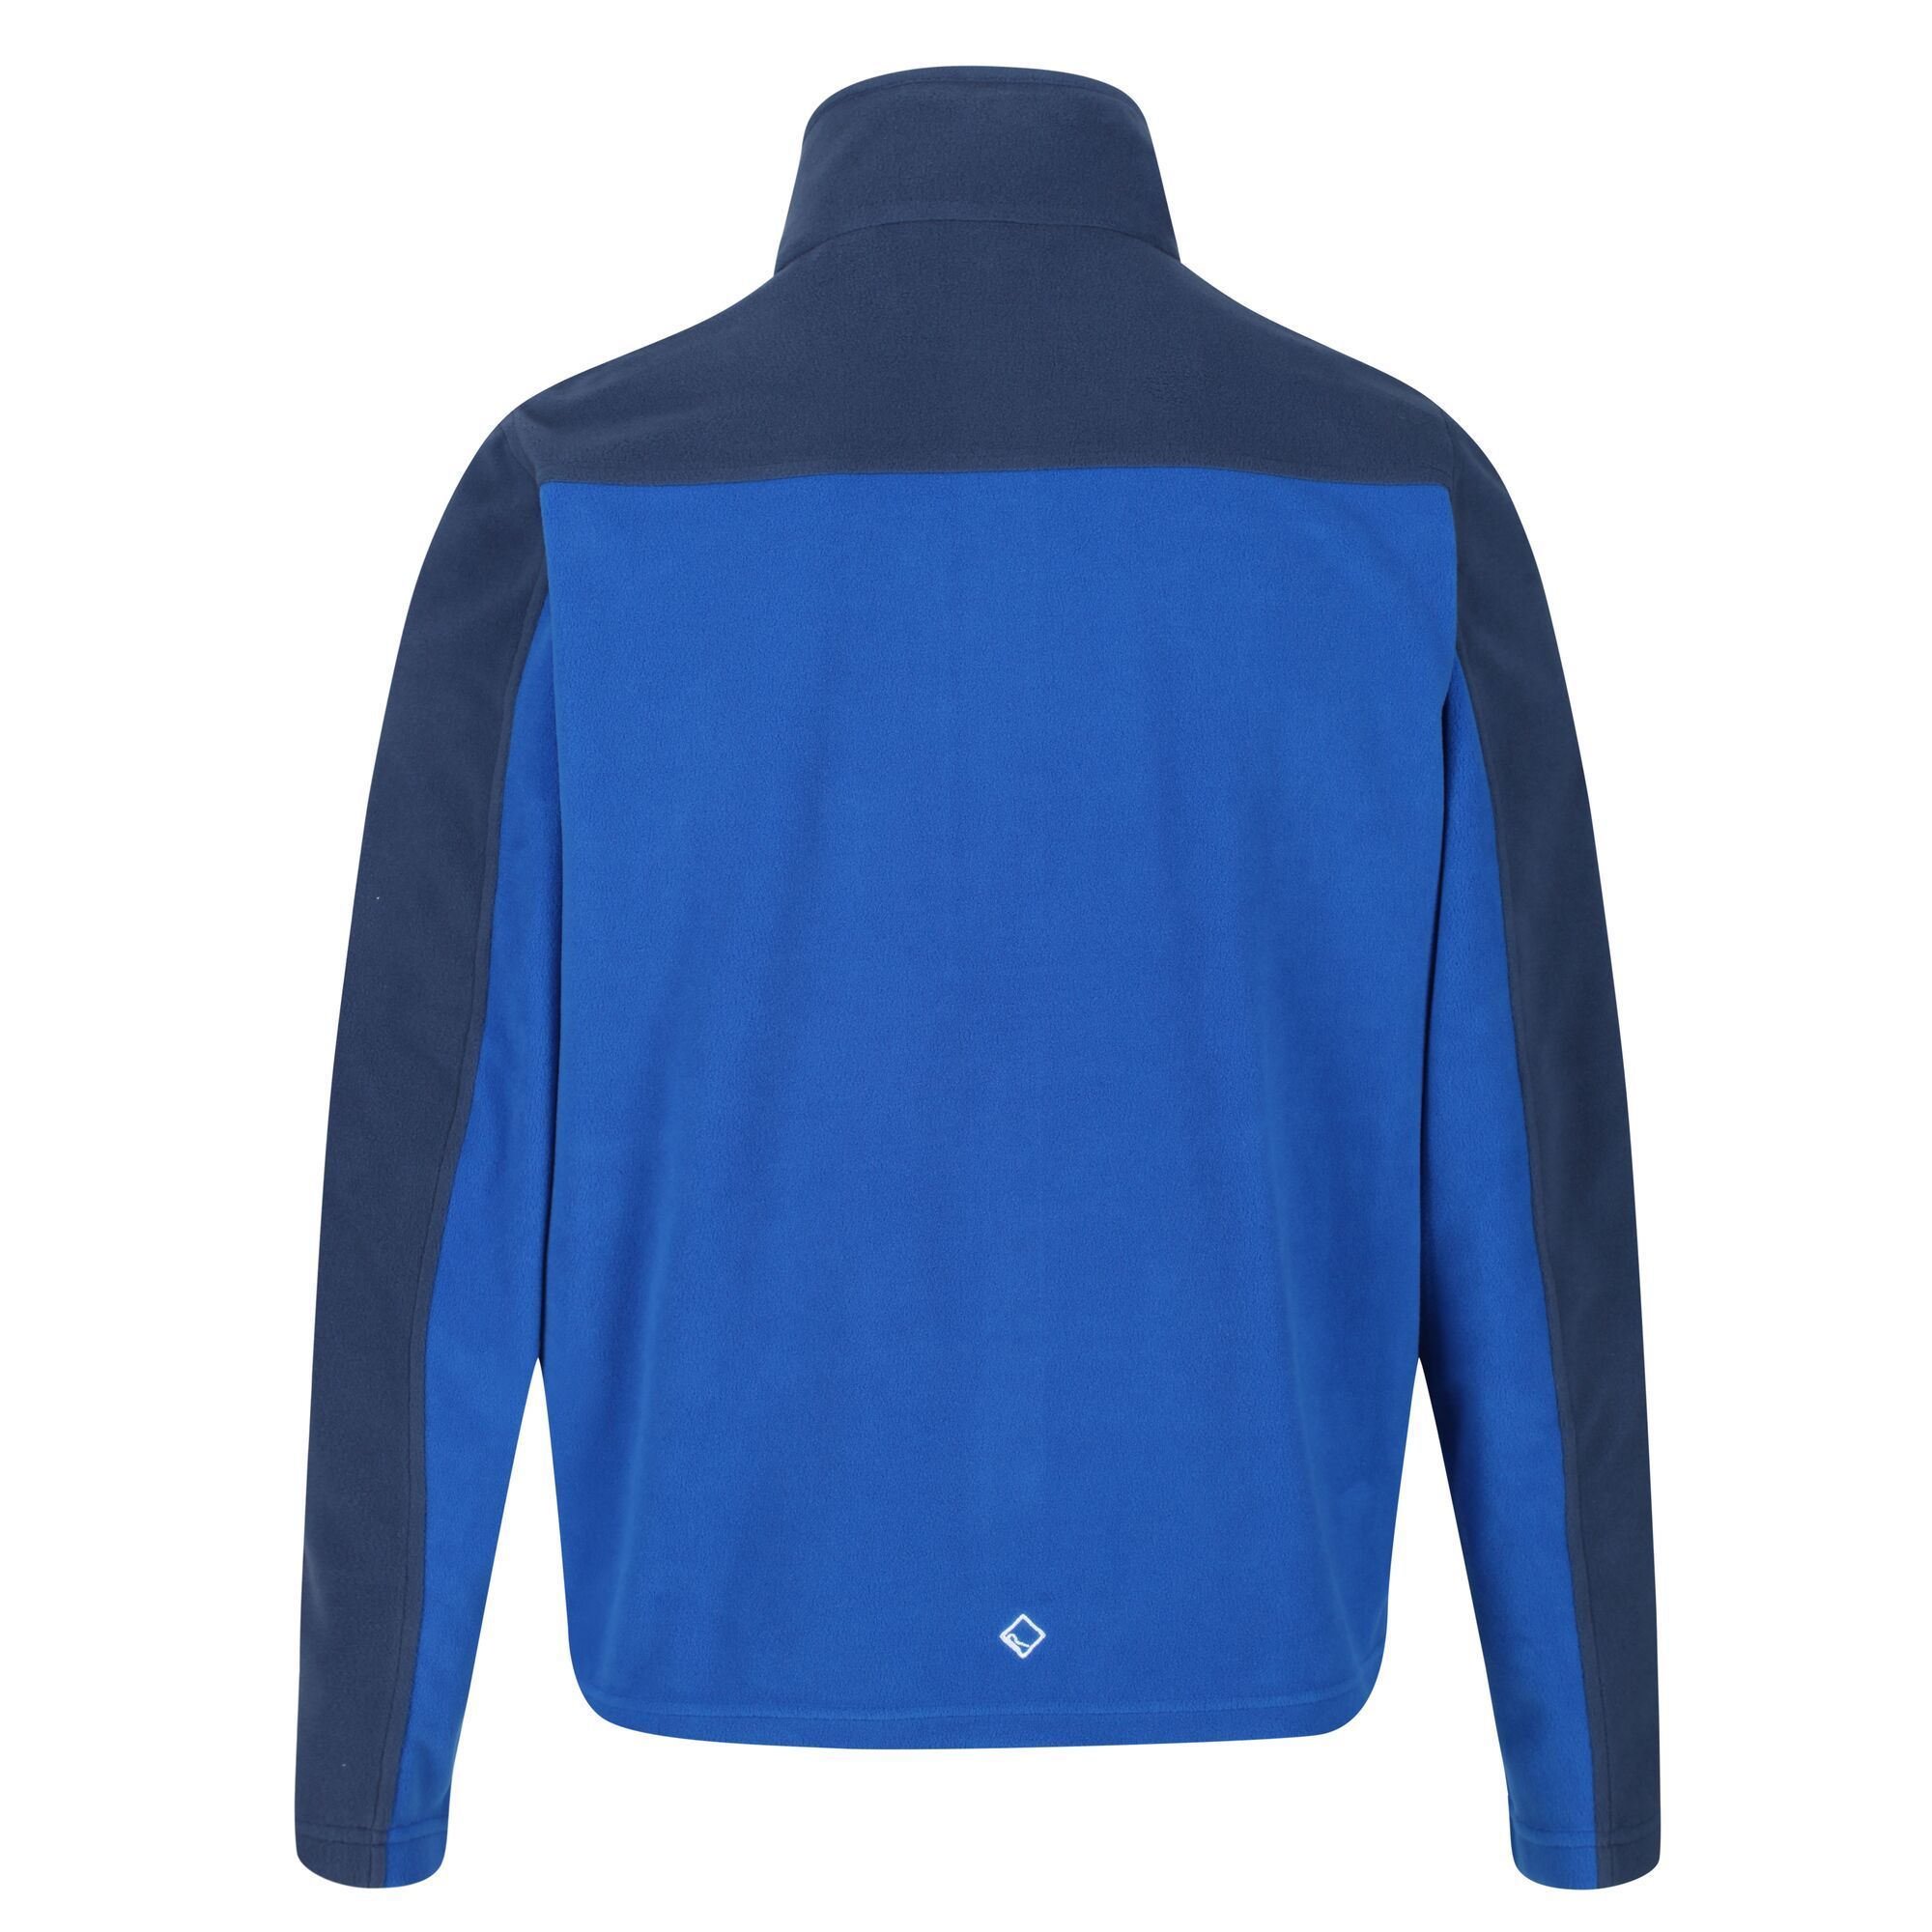 Material: 100% Polyester. Soft, durable and warm mid-weight Symmetry fleece (200gsm) jacket.  Stand collar for wind protection and adjustable shock-cord hem. Features zipped lower pockets. Regatta logo embroidery on the chest.